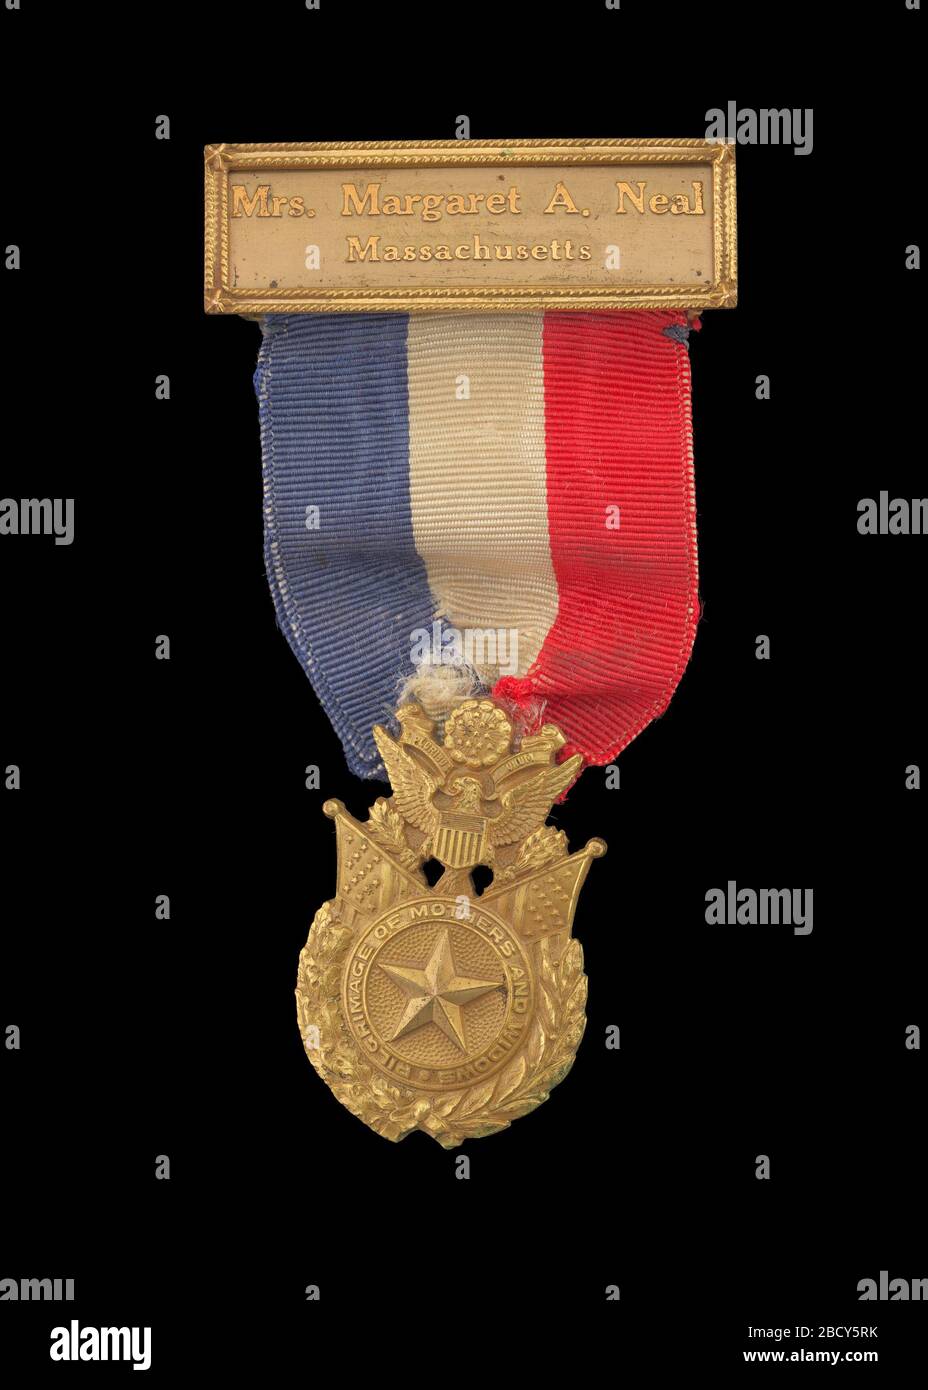 World War I Gold Star Mothers Pilgrimage Medal issued to Mrs Margaret A Neal. 2019.16a: A World War I Gold Star Mothers Pilgrimage medal issued to Mrs. Margaret A. Neal of Massachusetts, in commemoration of her pilgrimage to her stepson's, Second Lieutenant Ralph T. Neal's, gravesite at the Meuse-Argonne American Cemetery and Memorial in France. World War I Gold Star Mothers Pilgrimage Medal issued to Mrs Margaret A Neal Stock Photo